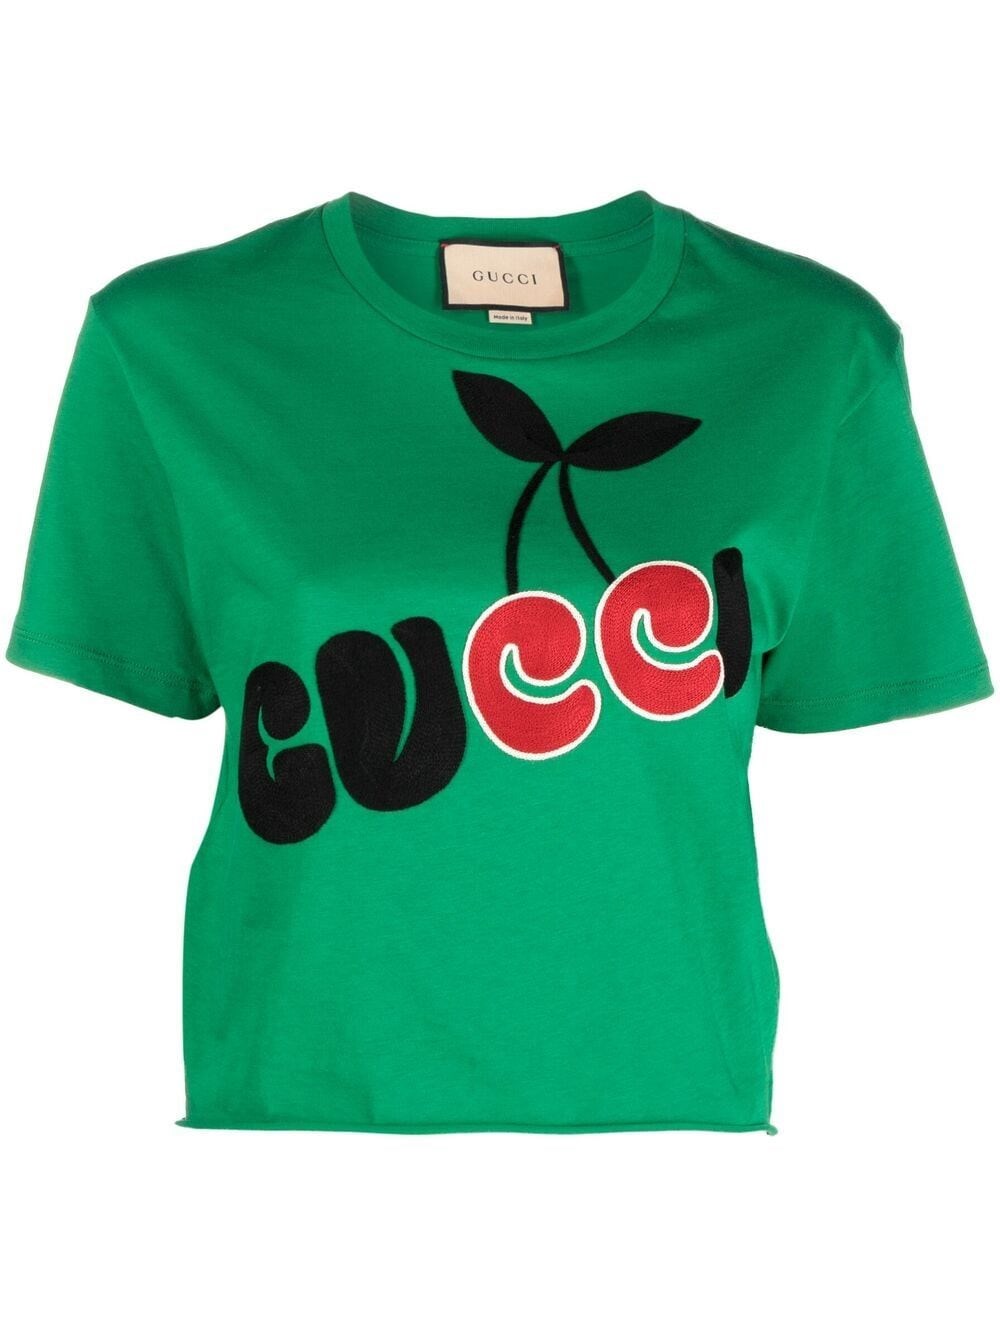 gucci LOGO T-SHIRT available on montiboutique.com - 39199